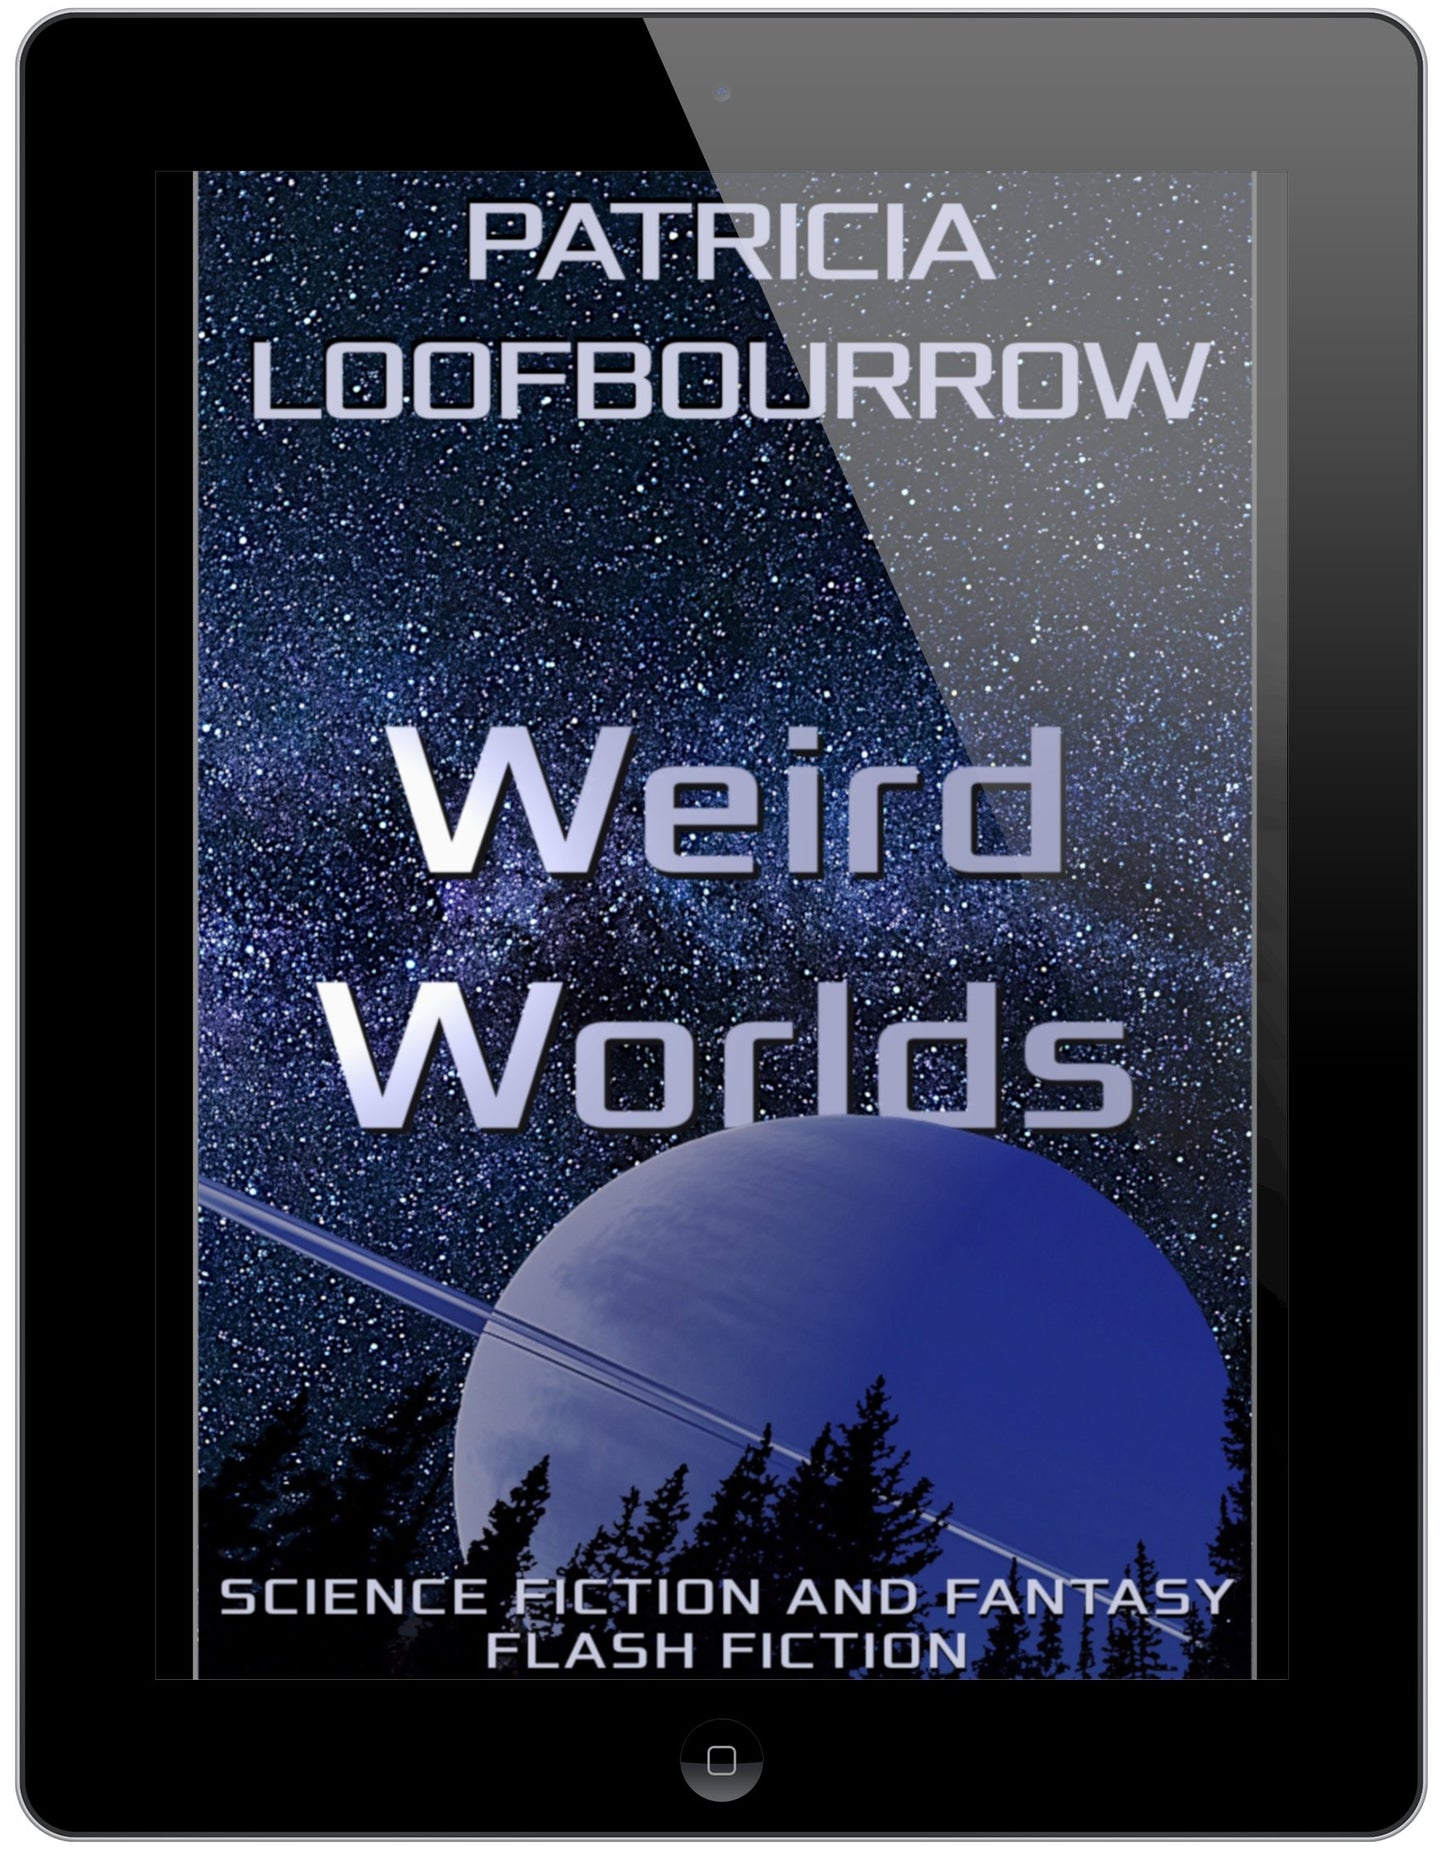 Weird Worlds: Science Fiction and Fantasy Flash Fiction [Kindle and ePUB] - Patricia Loofbourrow